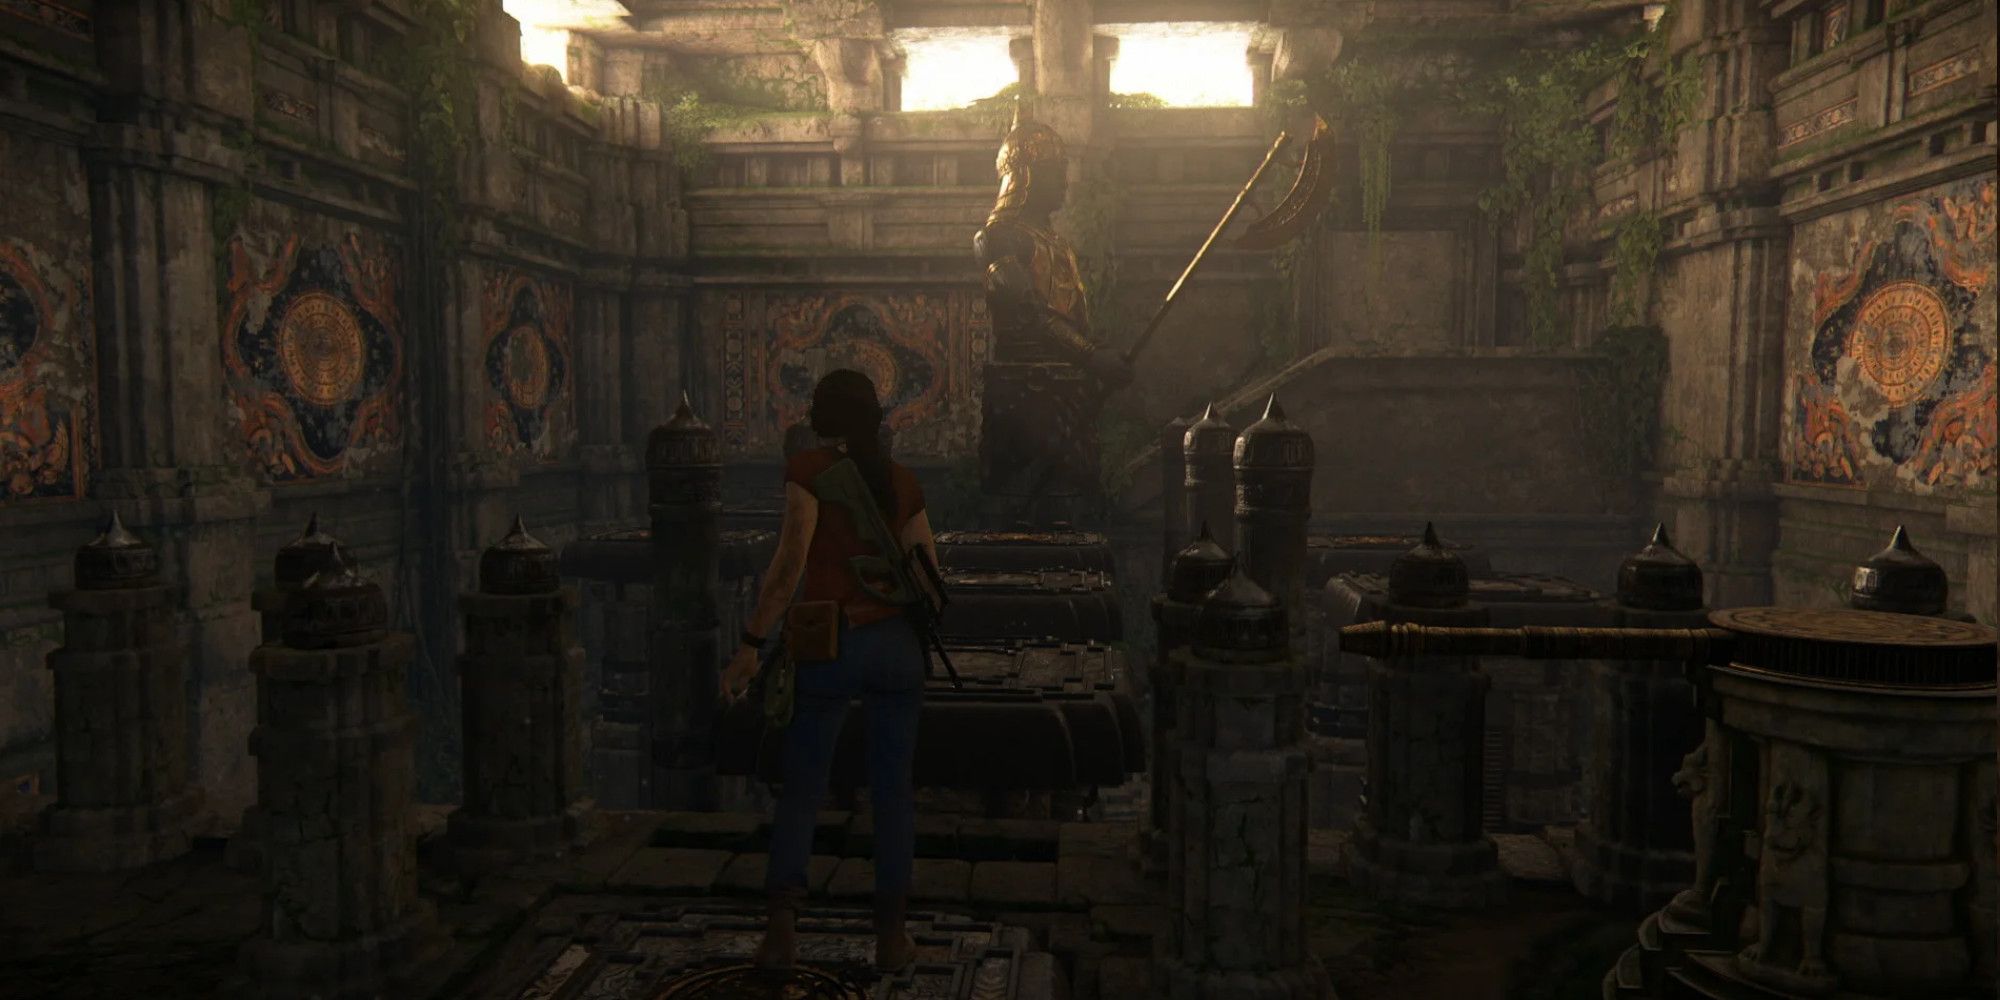 chloe stands on a platform in a room with a large statue holding a long axe